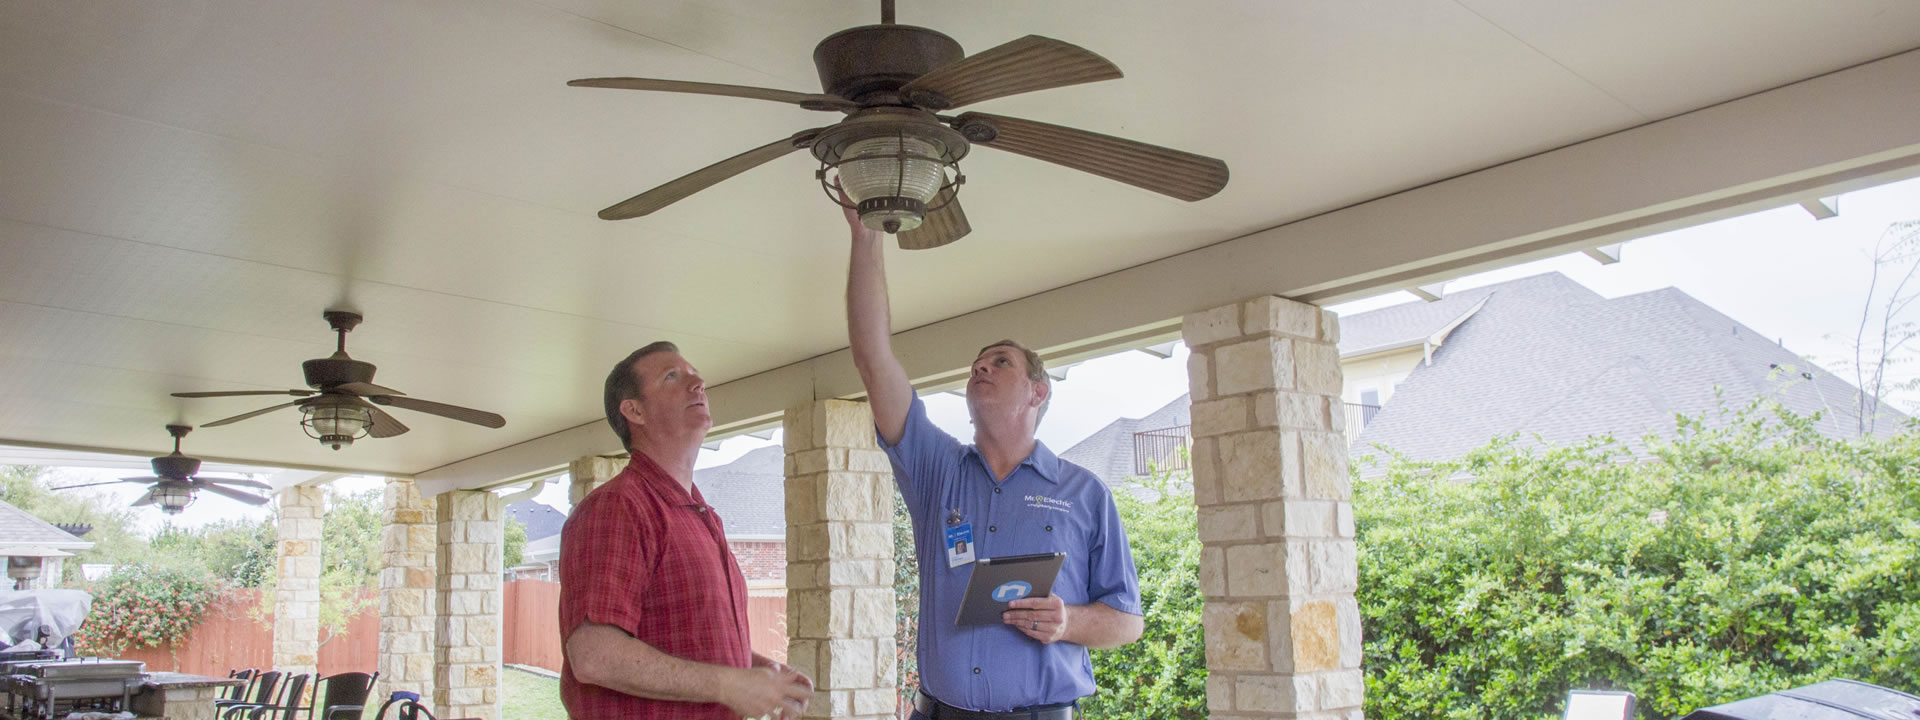 Ceiling Fan Installation in The Woodlands